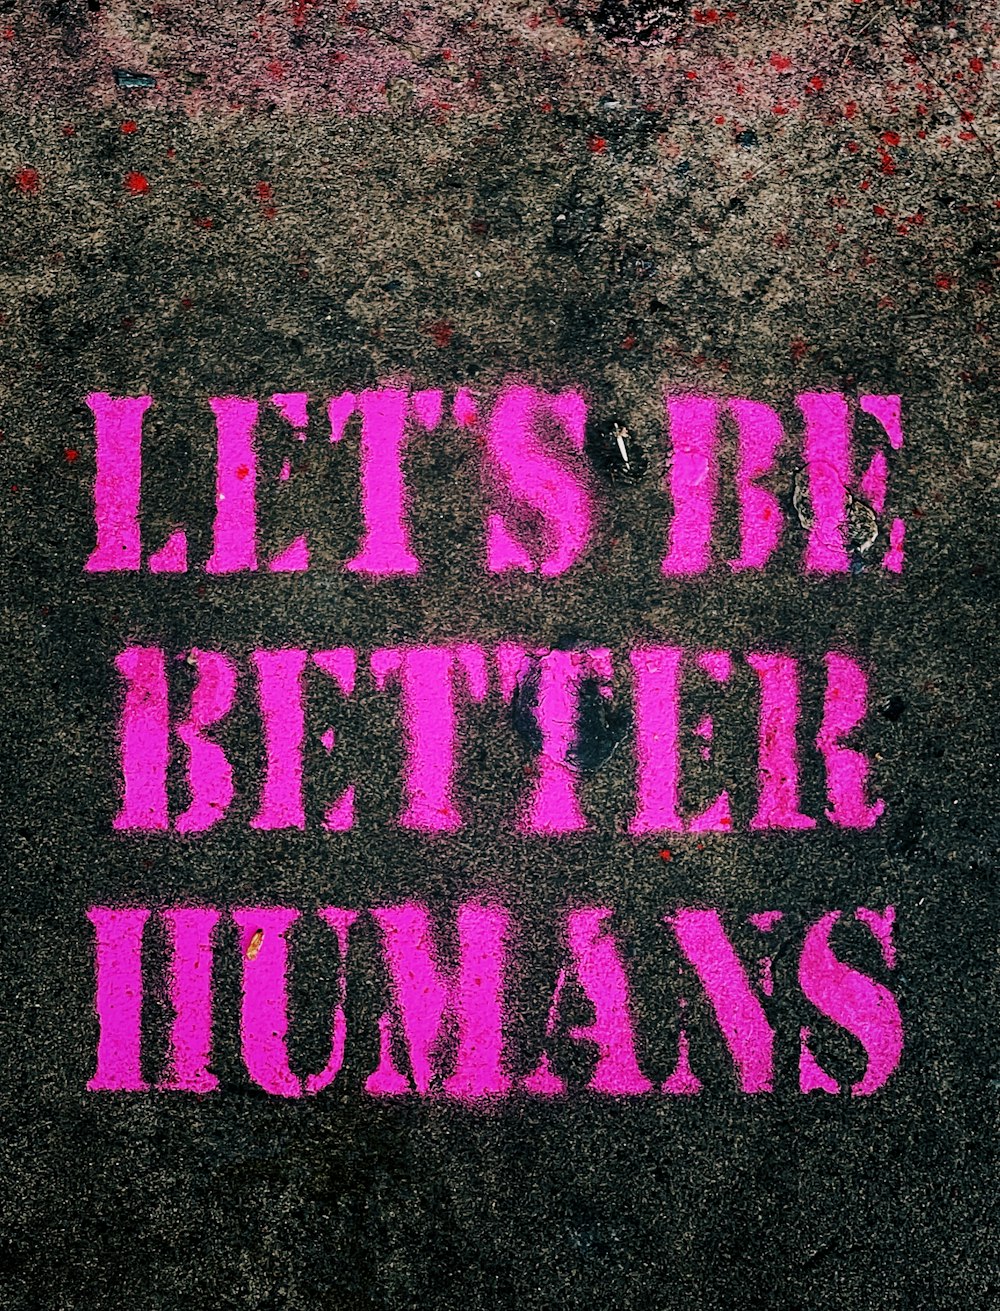 the words let's be better humans are painted on the sidewalk